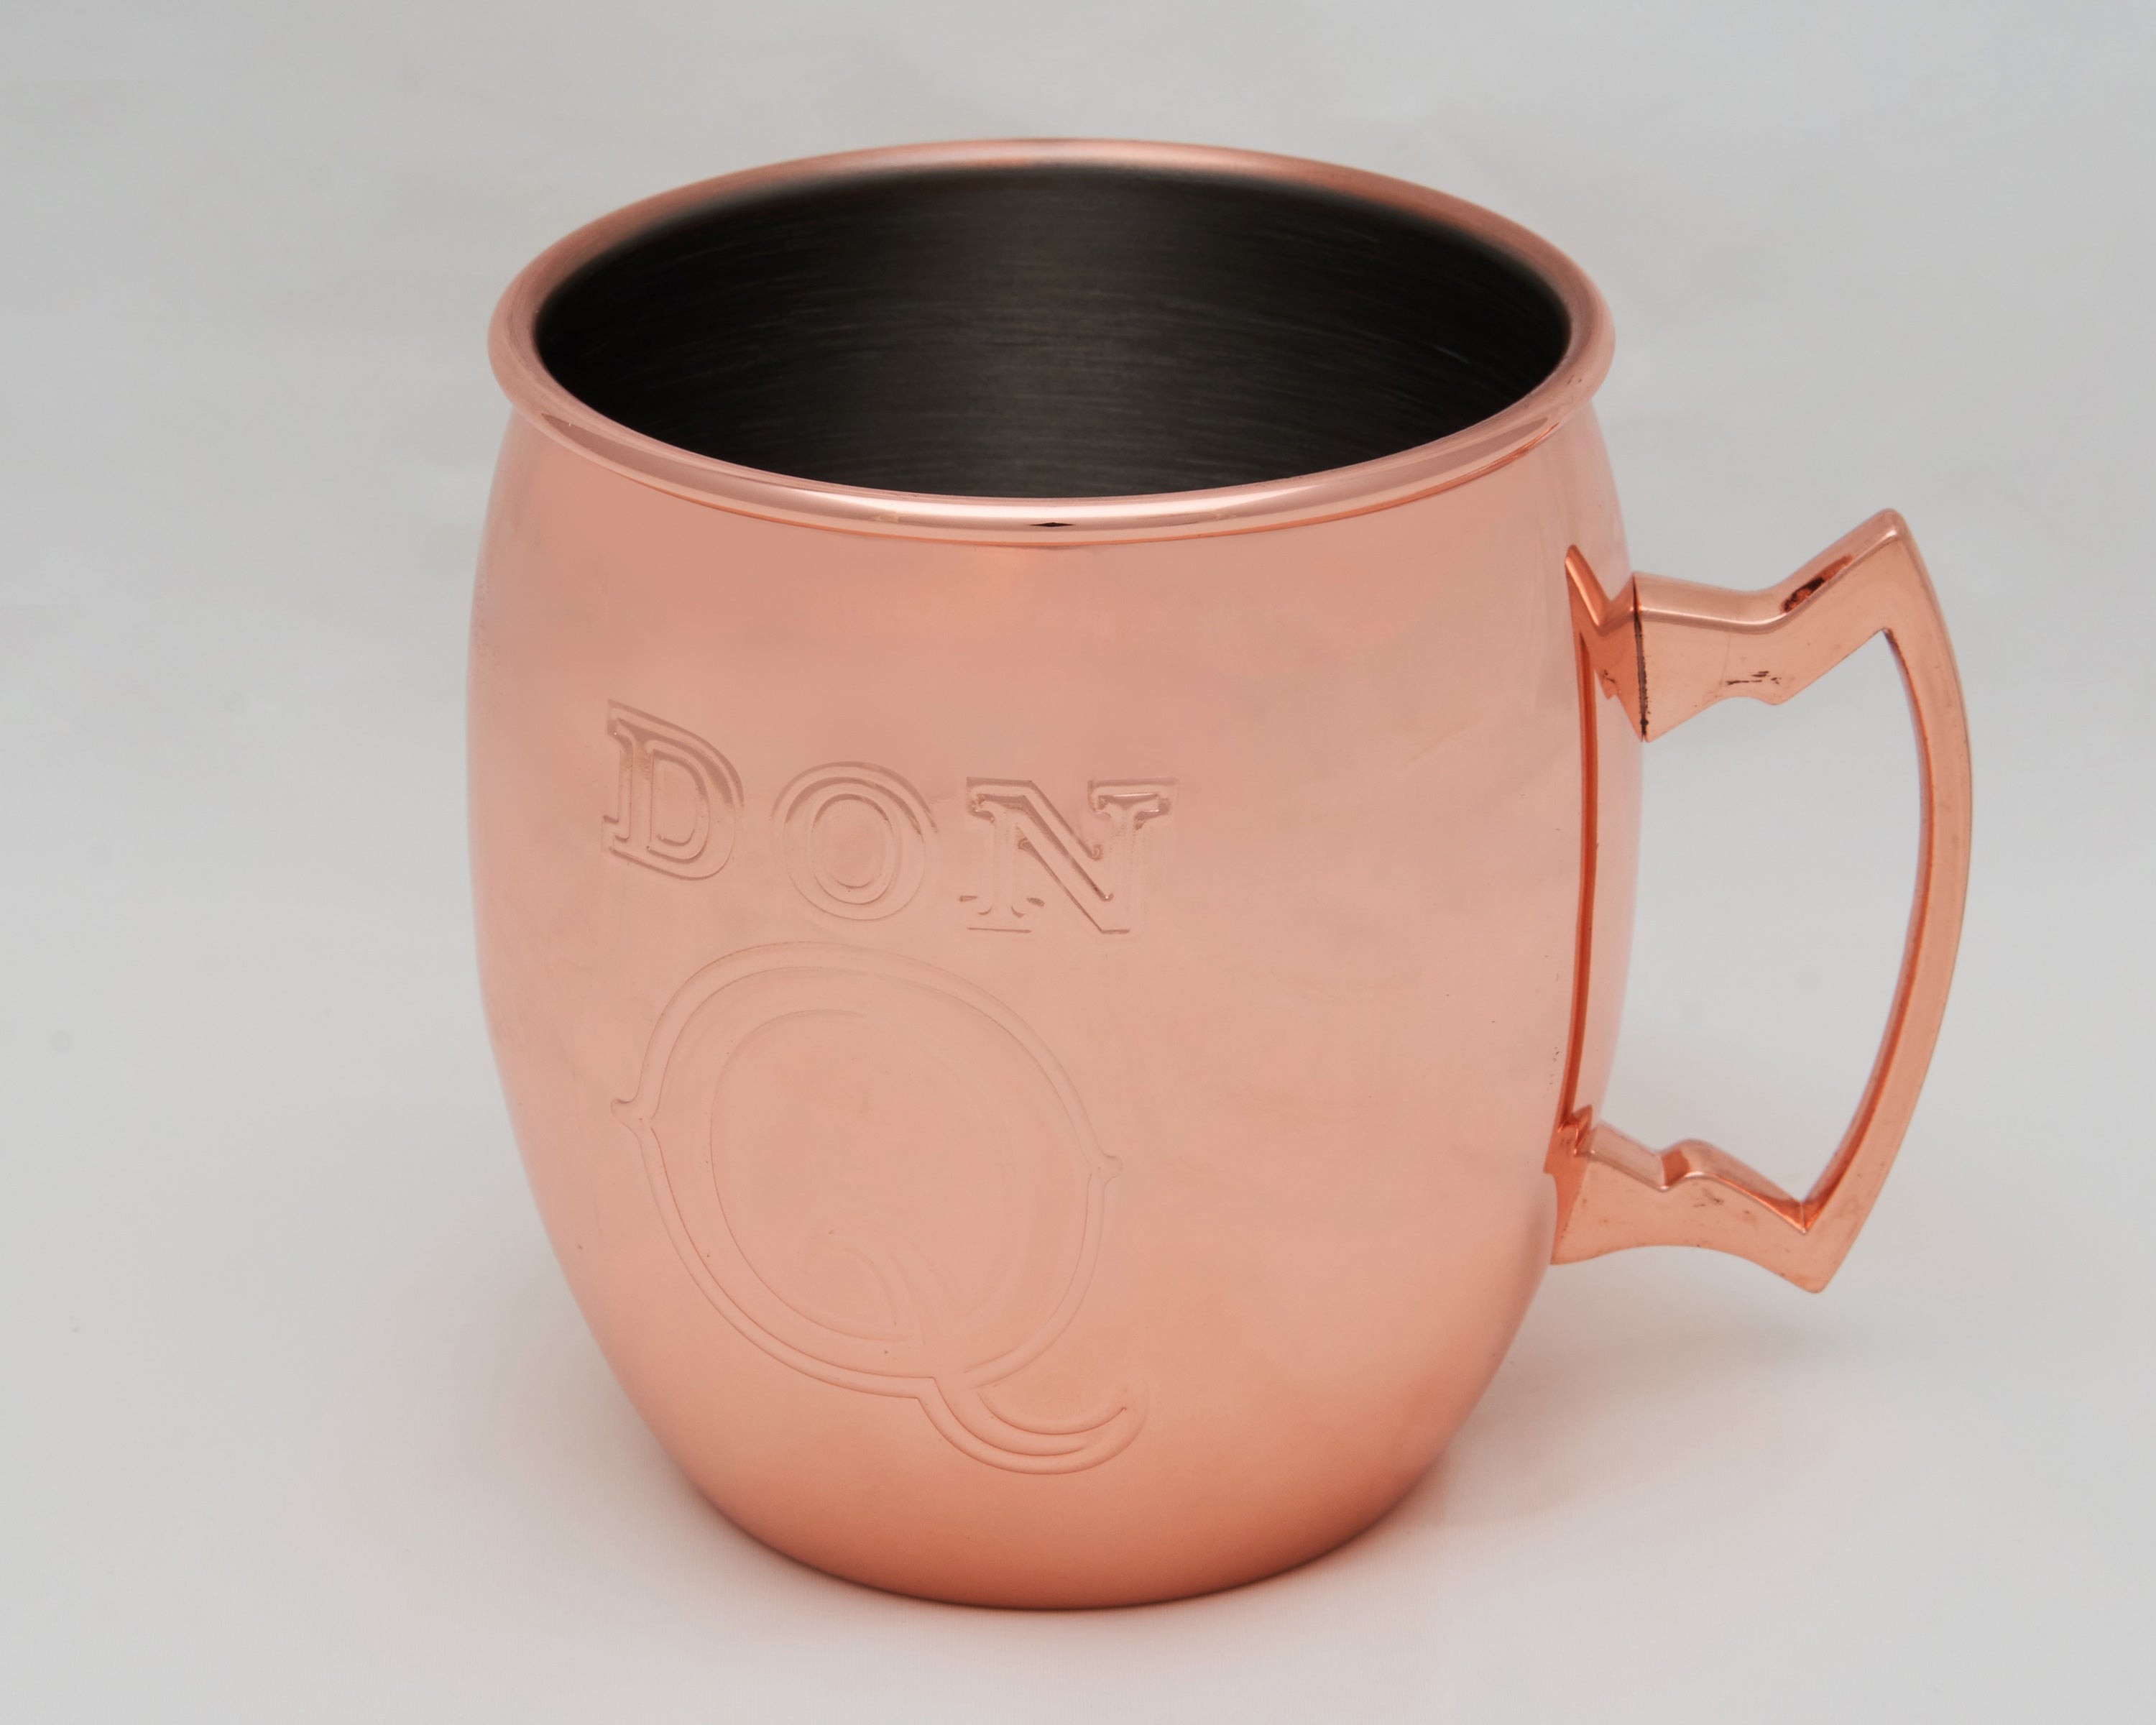 Don Q Moscow Mule